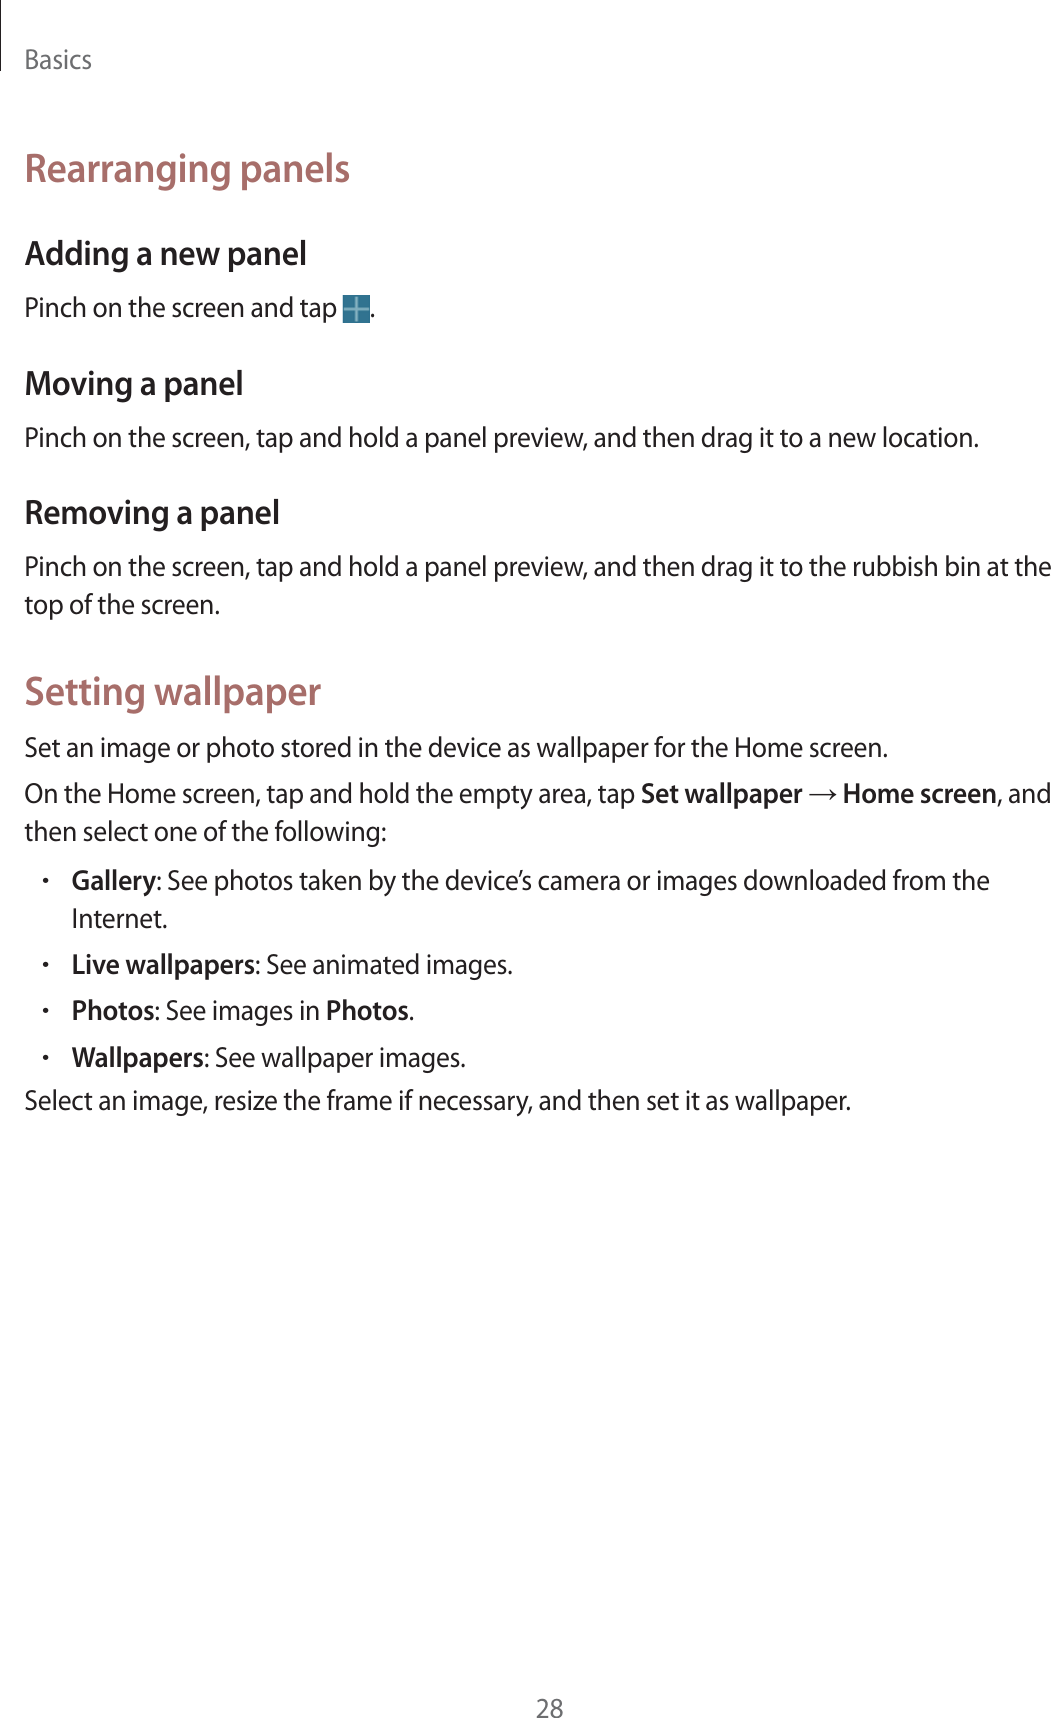 Basics28Rearranging panelsAdding a new panelPinch on the screen and tap  .Moving a panelPinch on the screen, tap and hold a panel preview, and then drag it to a new location.Removing a panelPinch on the screen, tap and hold a panel preview, and then drag it to the rubbish bin at the top of the screen.Setting wallpaperSet an image or photo stored in the device as wallpaper for the Home screen.On the Home screen, tap and hold the empty area, tap Set wallpaper ĺ Home screen, and then select one of the following:rGallery: See photos taken by the device’s camera or images downloaded from the Internet.rLive wallpapers: See animated images.rPhotos: See images in Photos.rWallpapers: See wallpaper images.Select an image, resize the frame if necessary, and then set it as wallpaper.